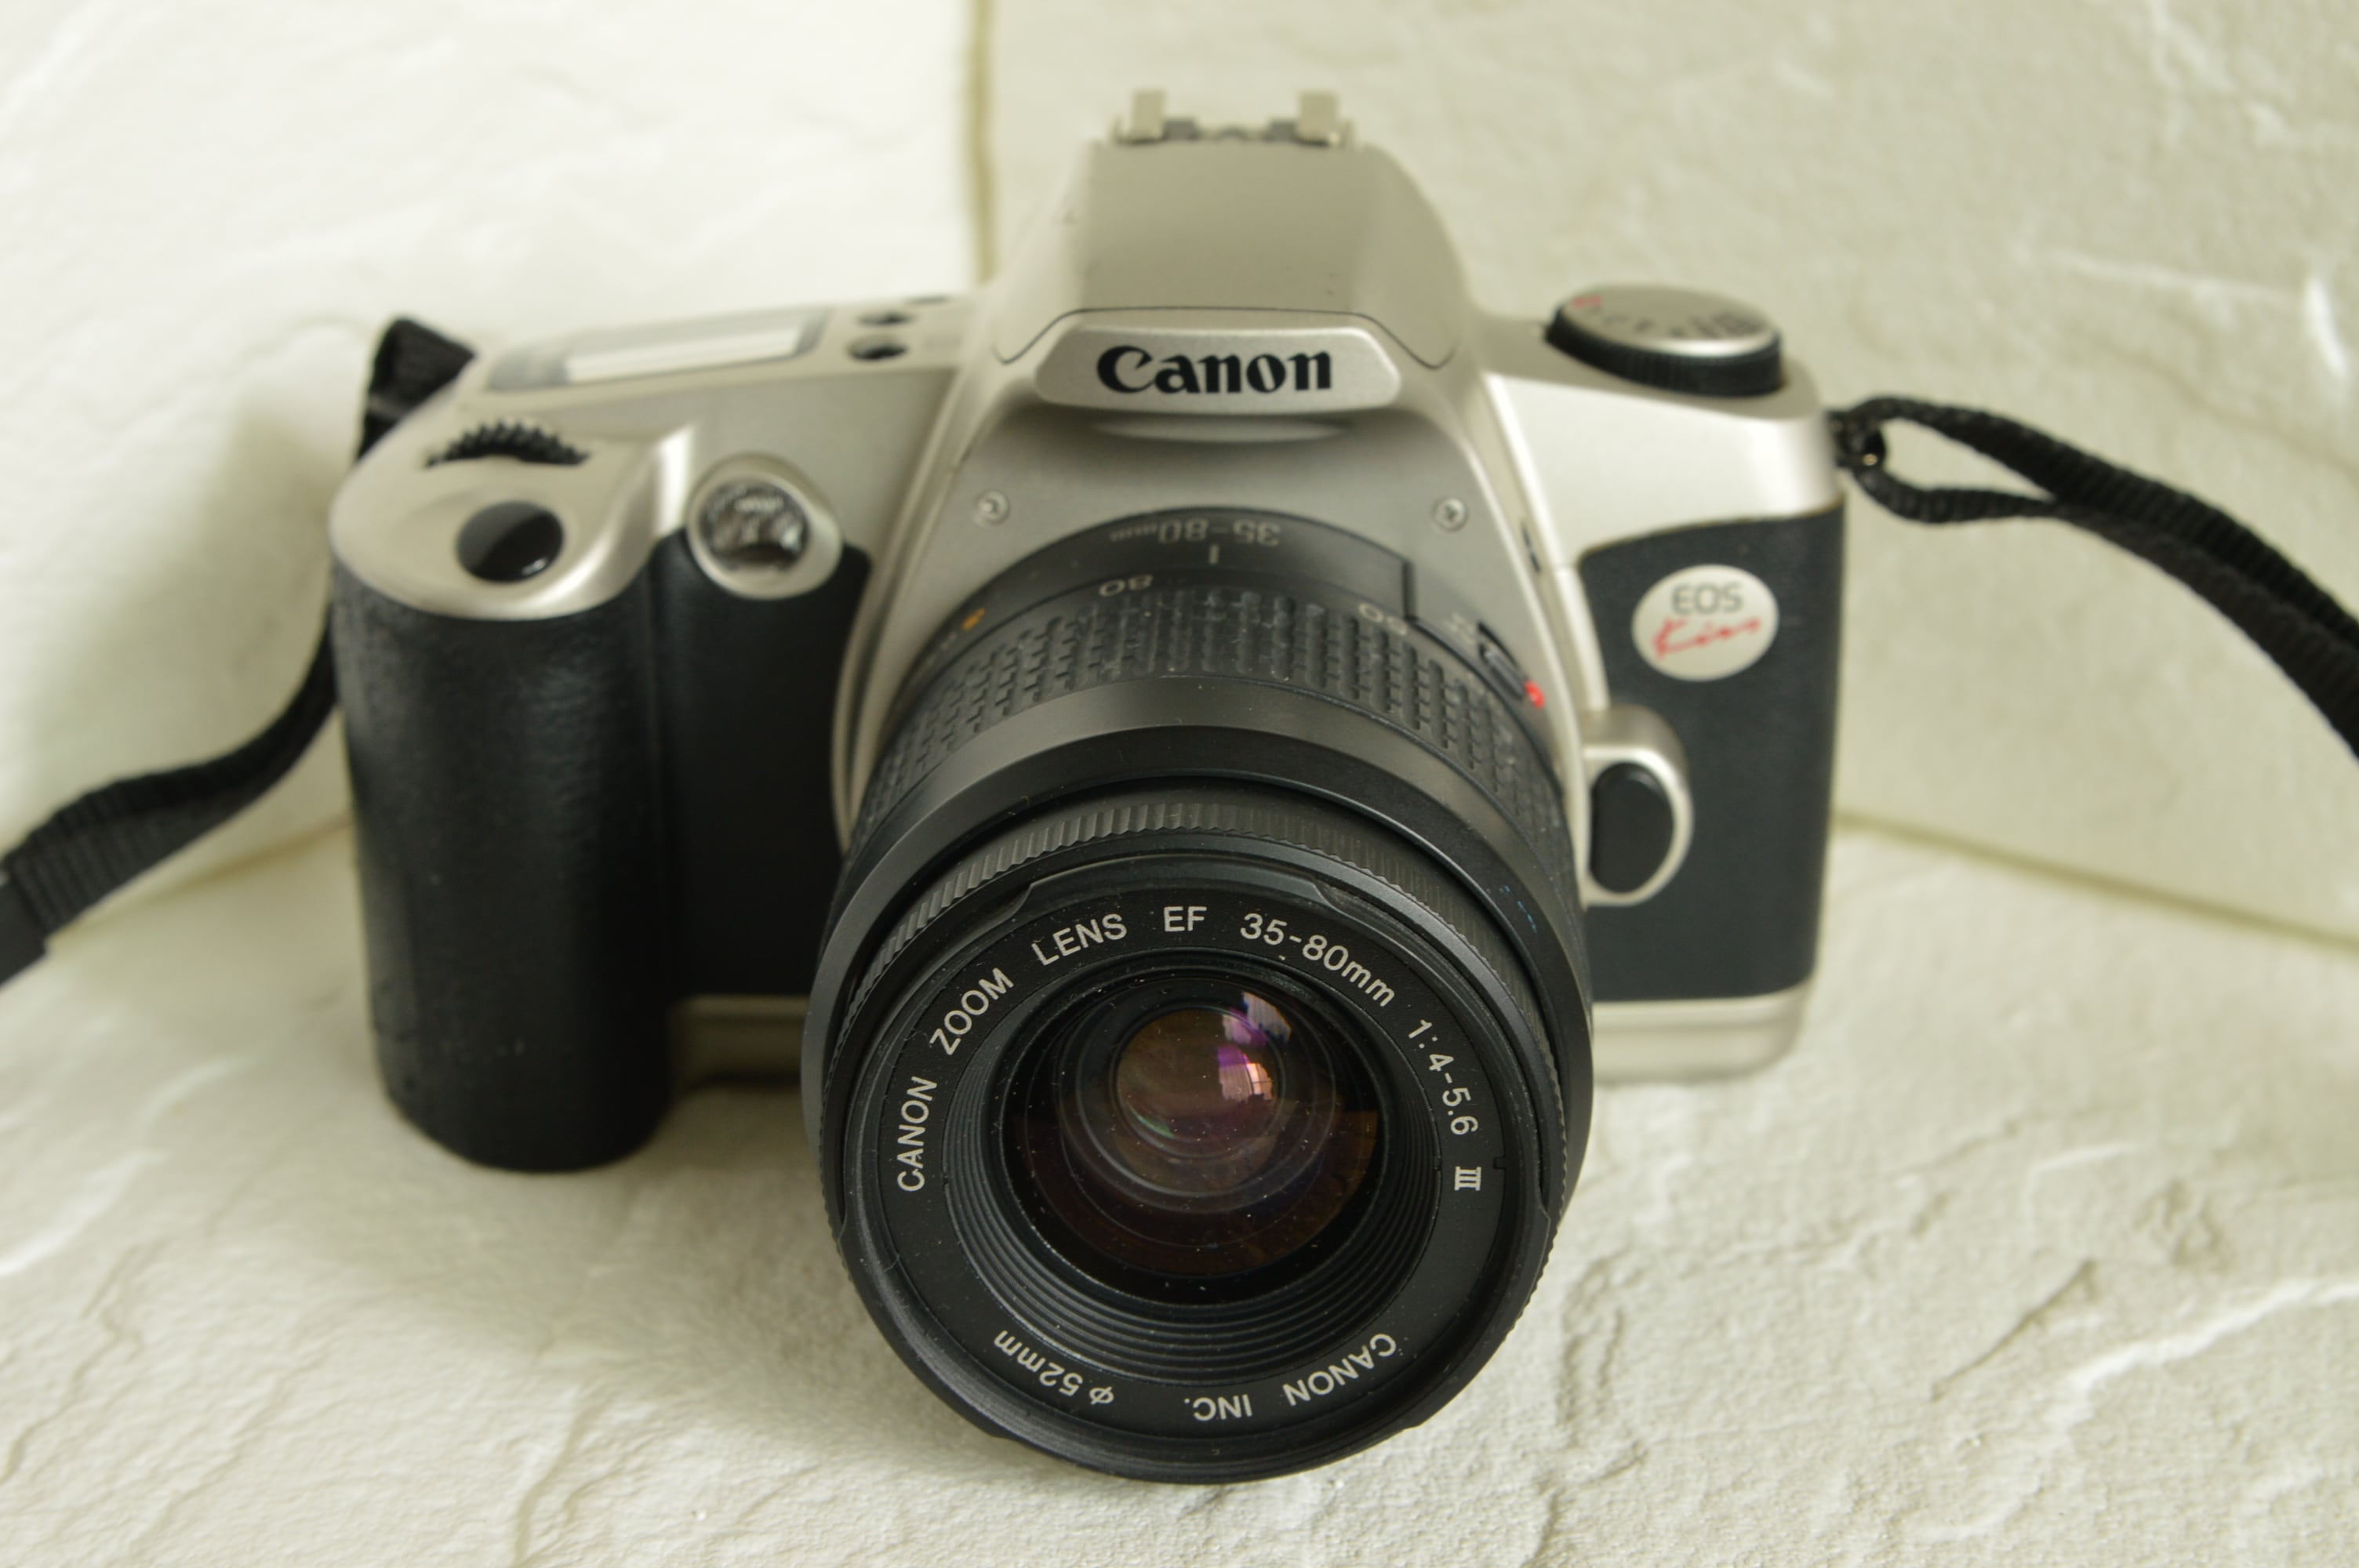 CANON EOS kiss PANORAMA + ZOOM LENS EF35 ～ 80mm 1.4 ー 5.6Ⅱ ...